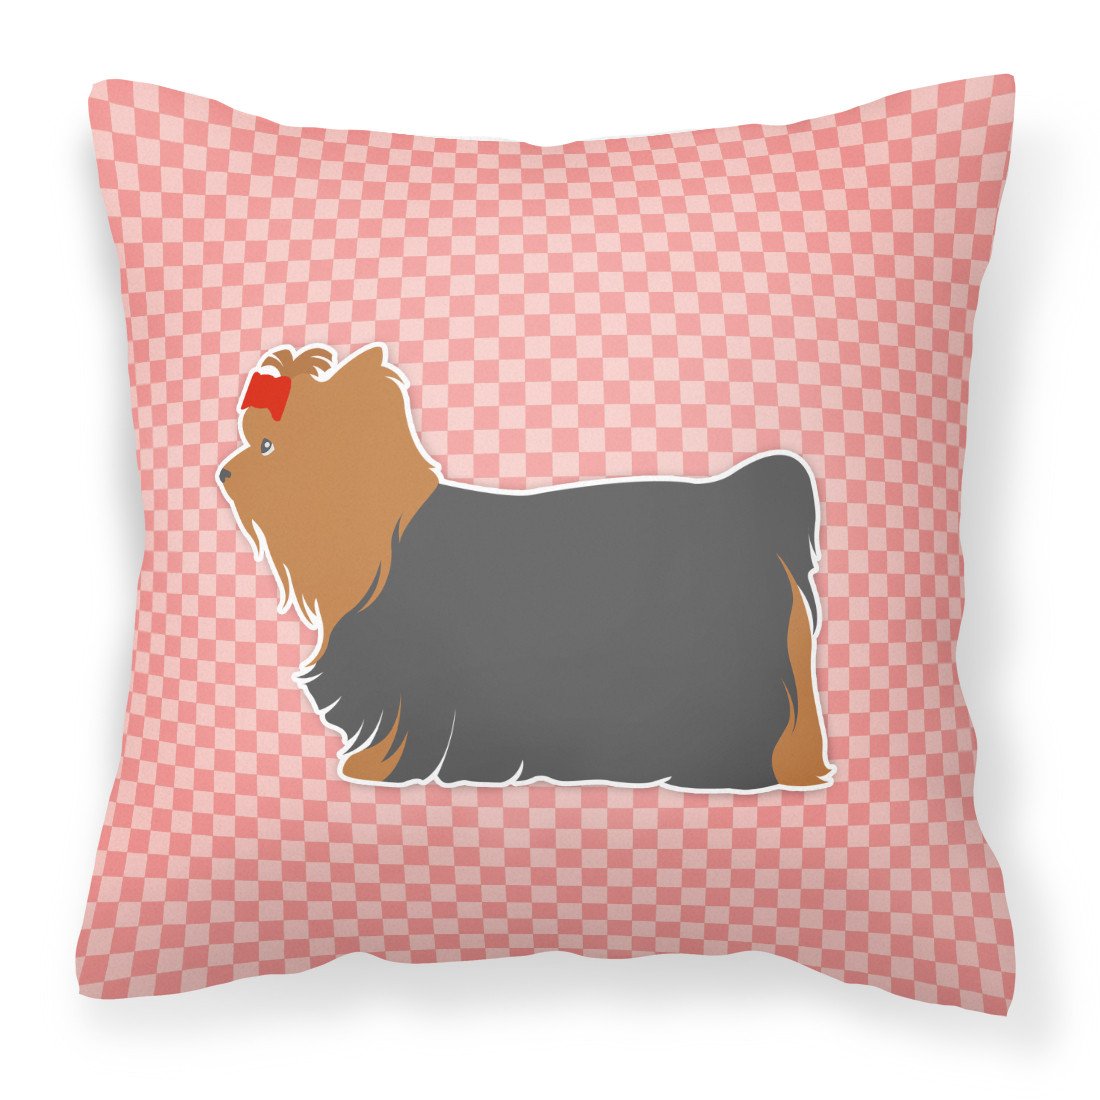 Yorkshire Terrier Yorkie Checkerboard Pink Fabric Decorative Pillow BB3634PW1818 by Caroline's Treasures